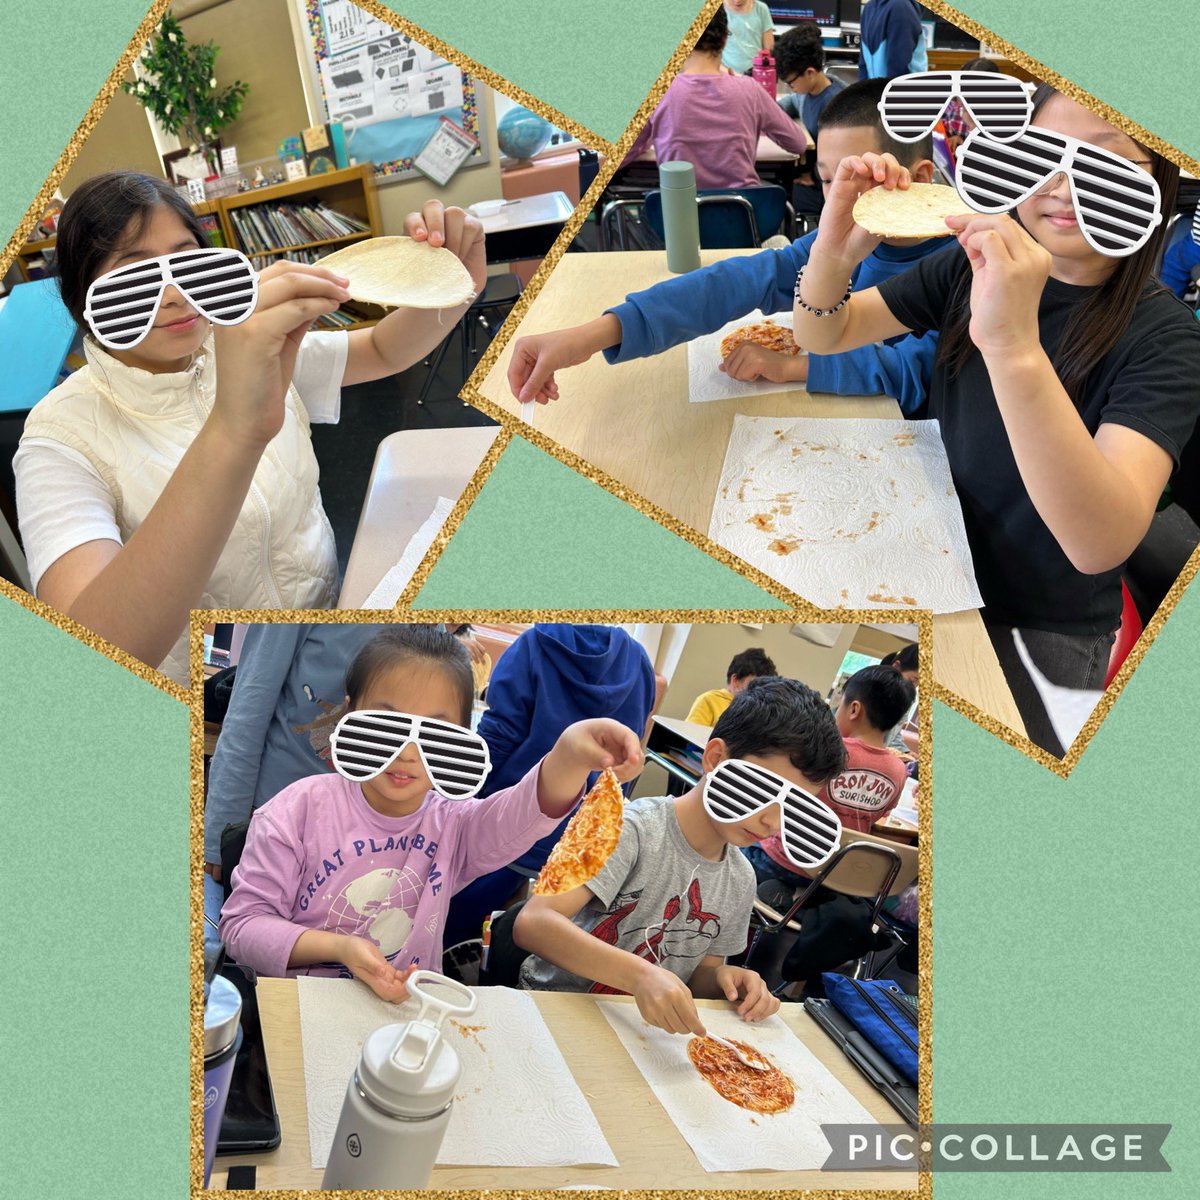 Did you know that astronauts can’t eat bread on @Space_Station, since crumbs can enter airways or machinery? They eat tortillas instead! We watched the video of astros making “space pizza” using tortillas & lots of sauce to keep the cheese strips from floating. We made our own!